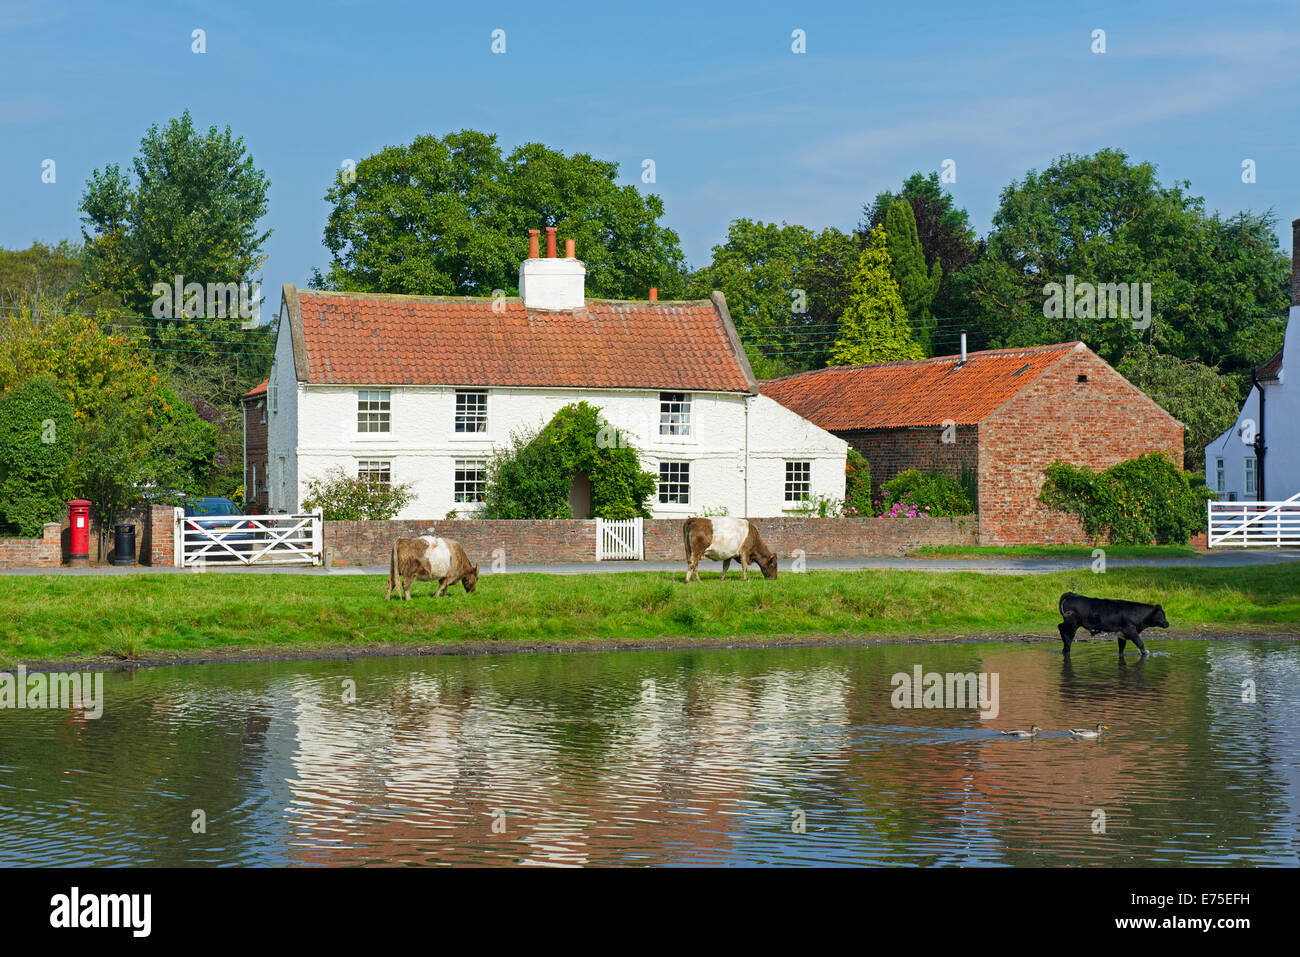 The village pond - and cattle - in Nun Monkton, near York, North Yorkshire, England UK Stock Photo